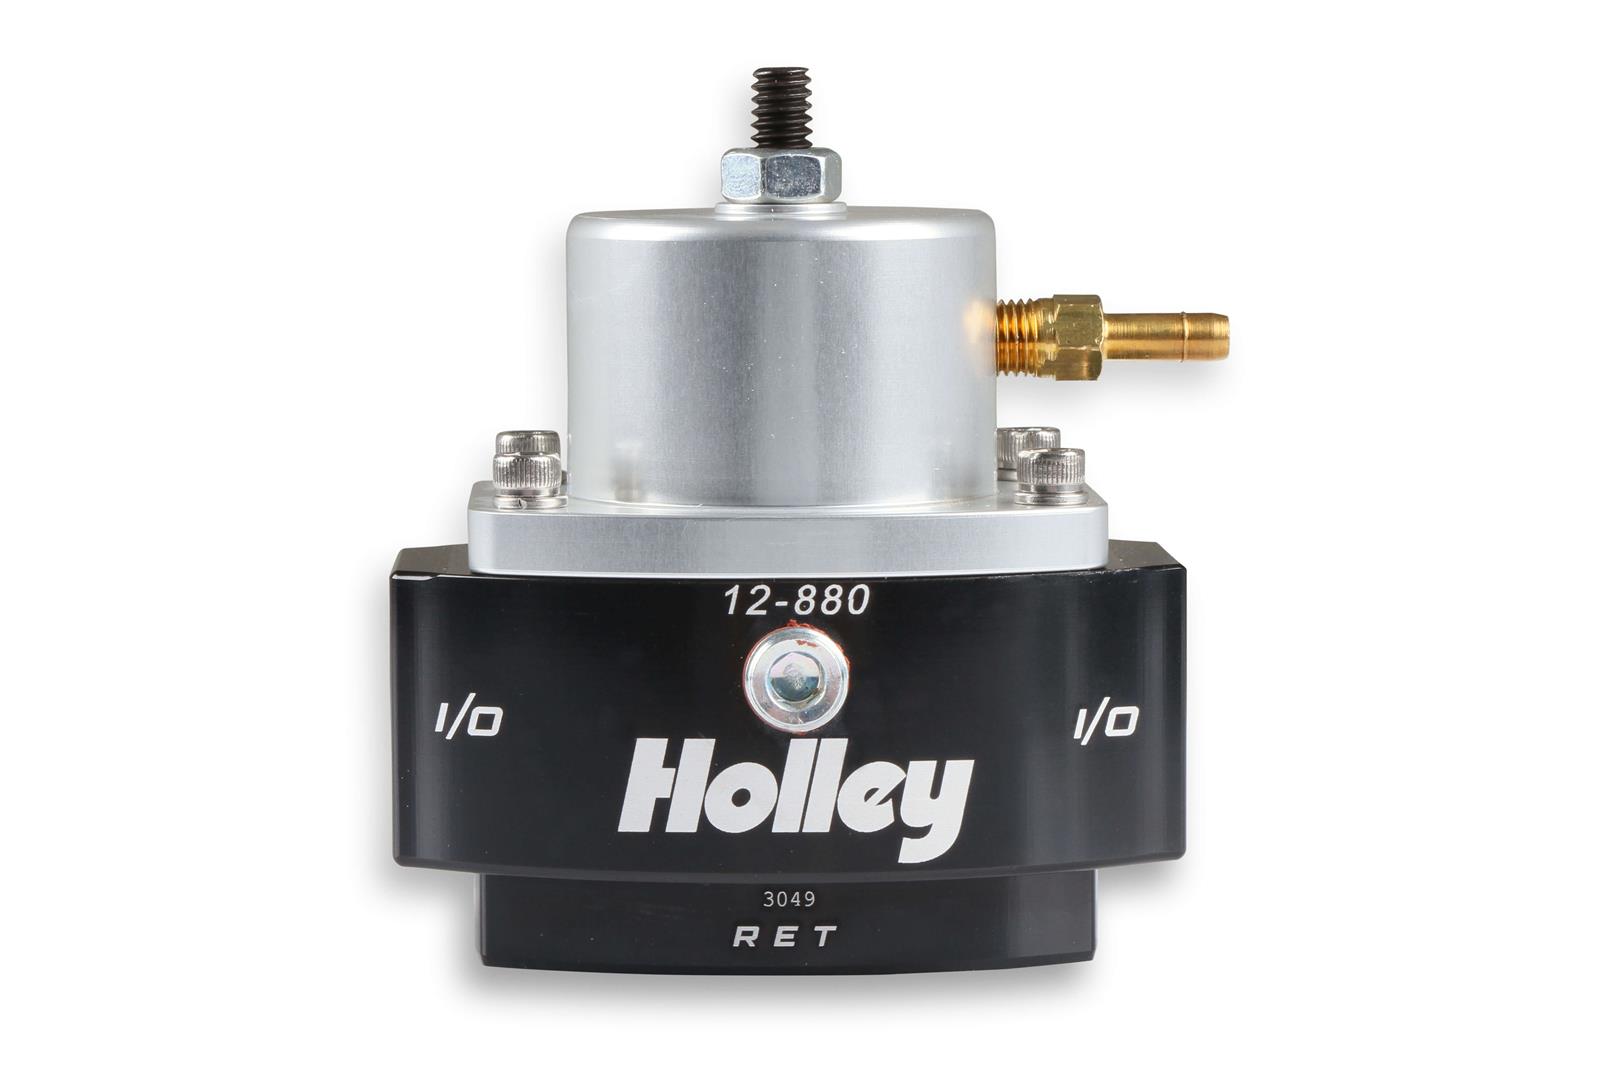 Holley 12 880kit Holley Bypass Fuel Pressure Regulator Kits Summit Racing